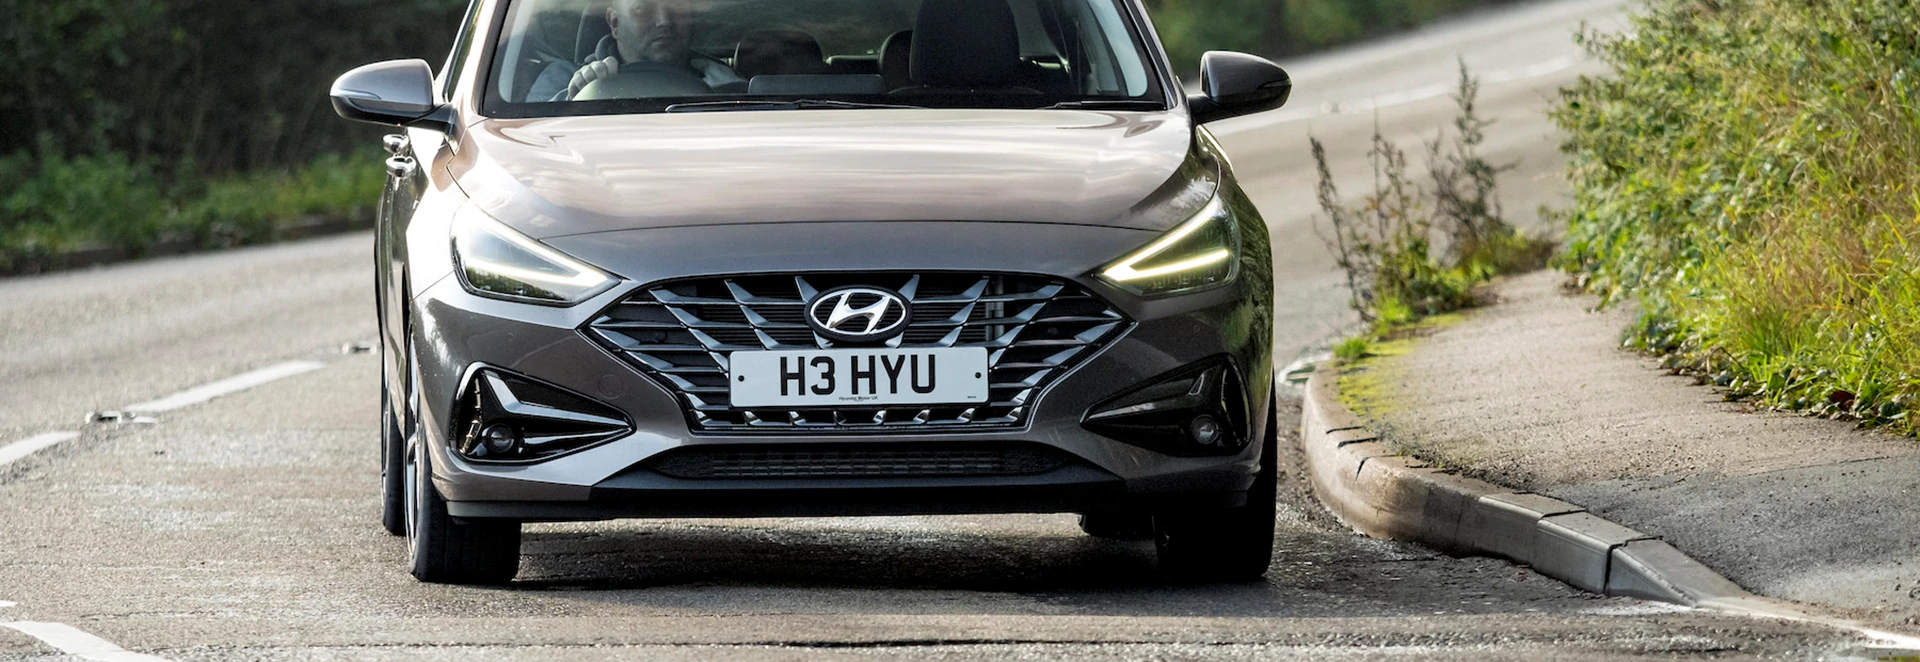 Buyer’s guide to the 2022 Hyundai i30 